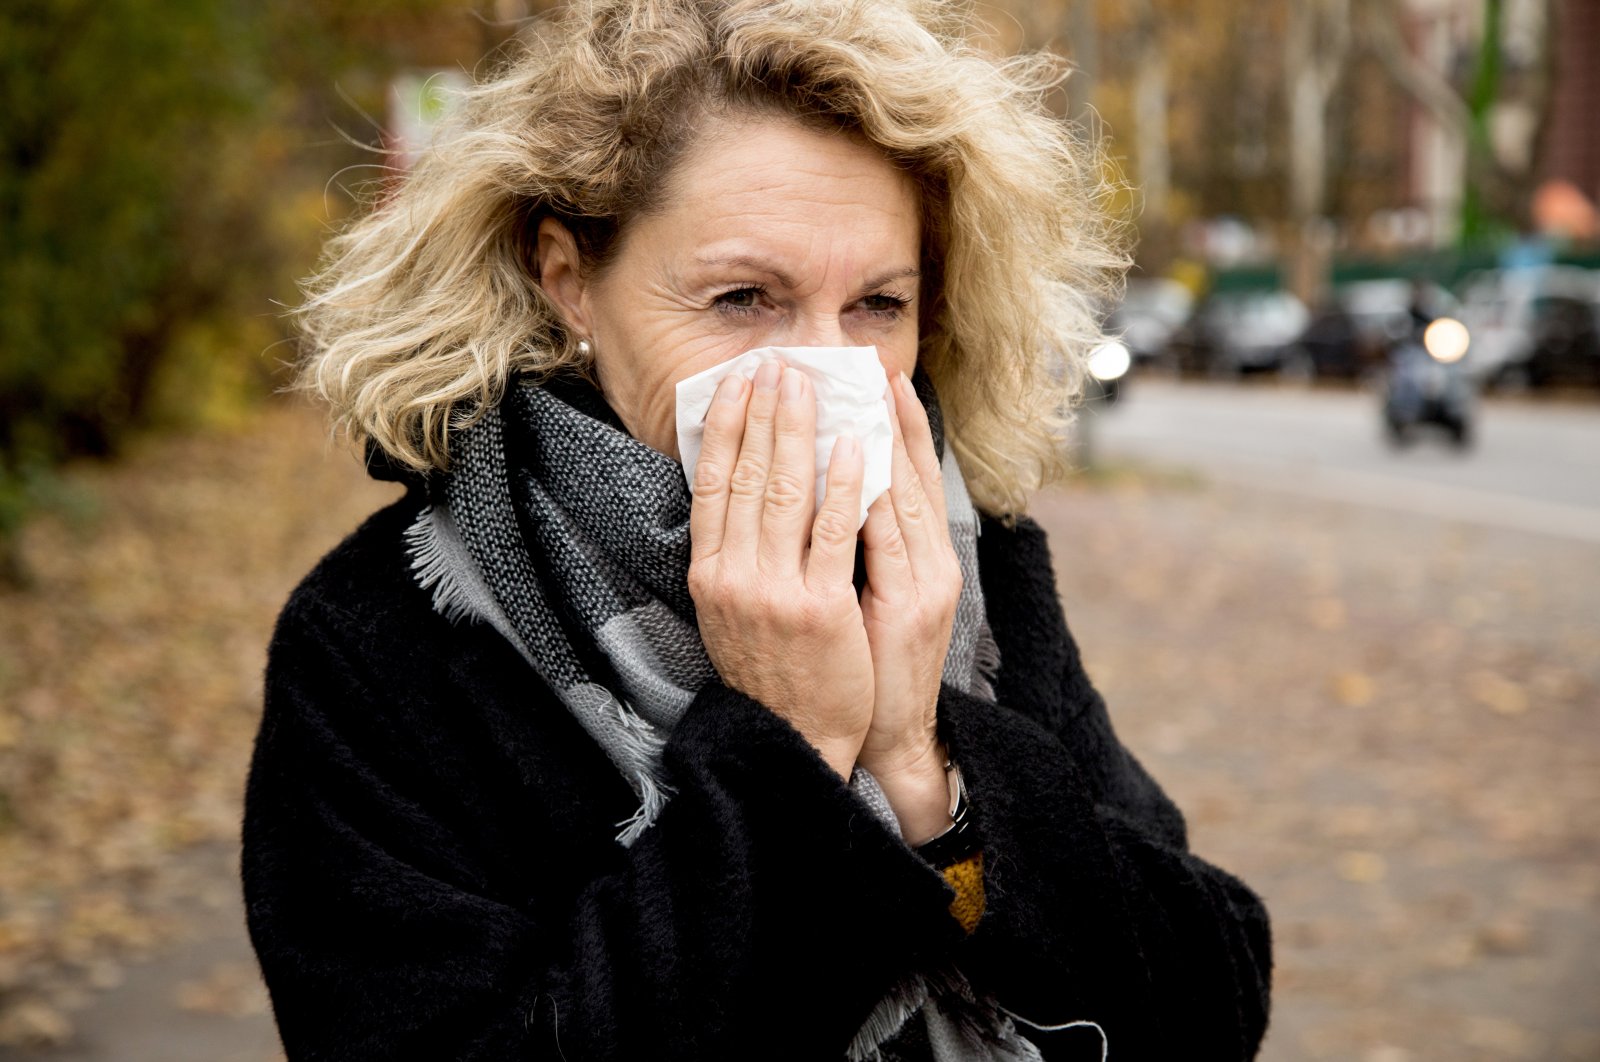 Tips to boost your immune system for healthier winter season